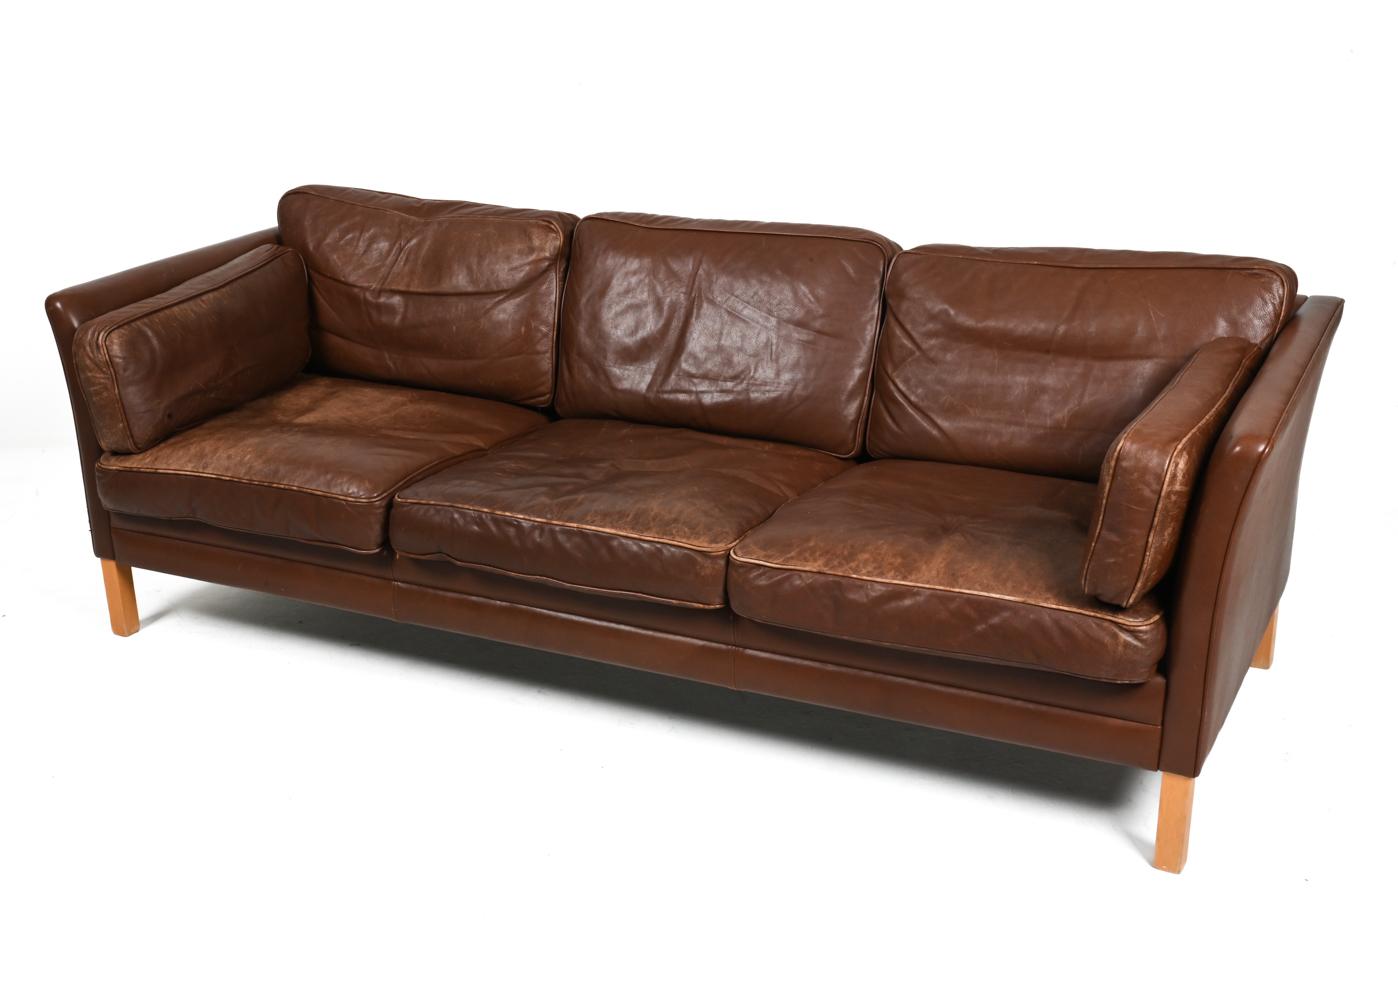 Introducing a Danish Modern masterpiece by Mogens Hansen – a three-seat sofa that effortlessly marries comfort with timeless Mid-Century design. Crafted in the Late 20th Century, this sofa boasts luxurious chocolate brown leather upholstery which